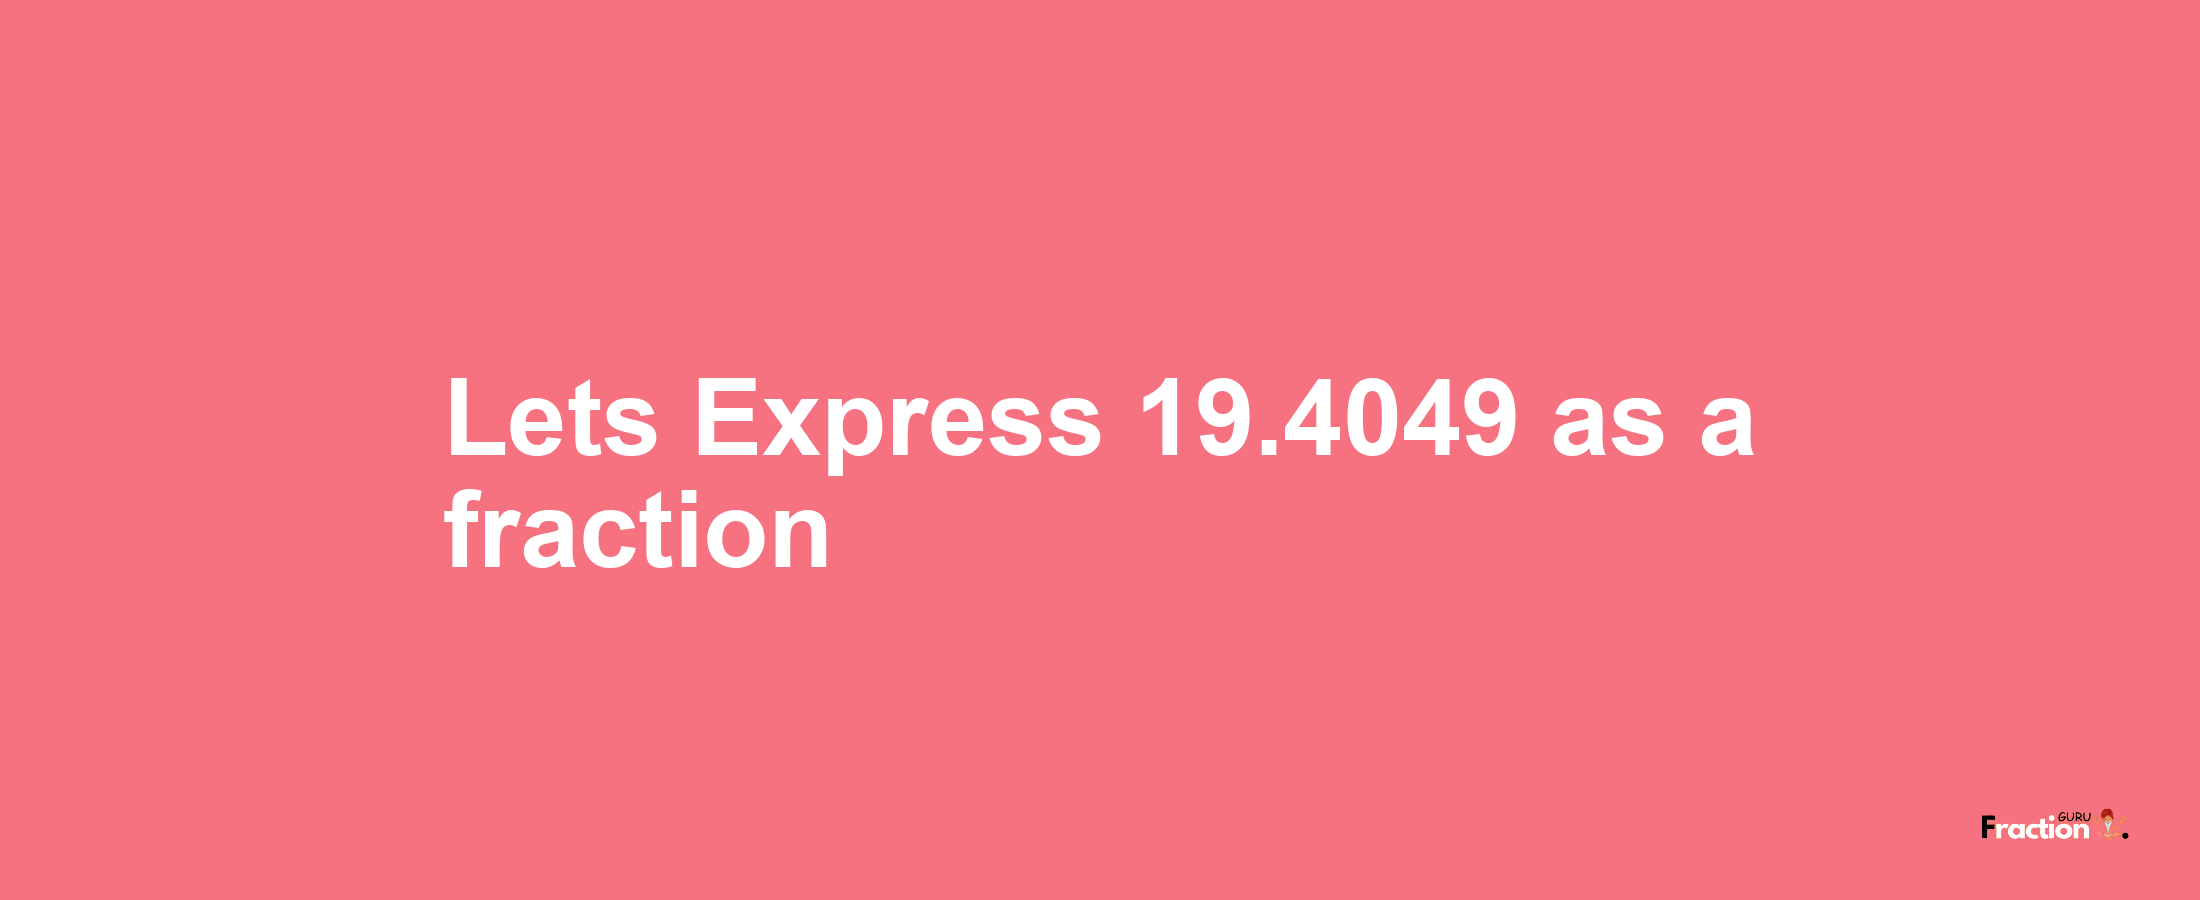 Lets Express 19.4049 as afraction